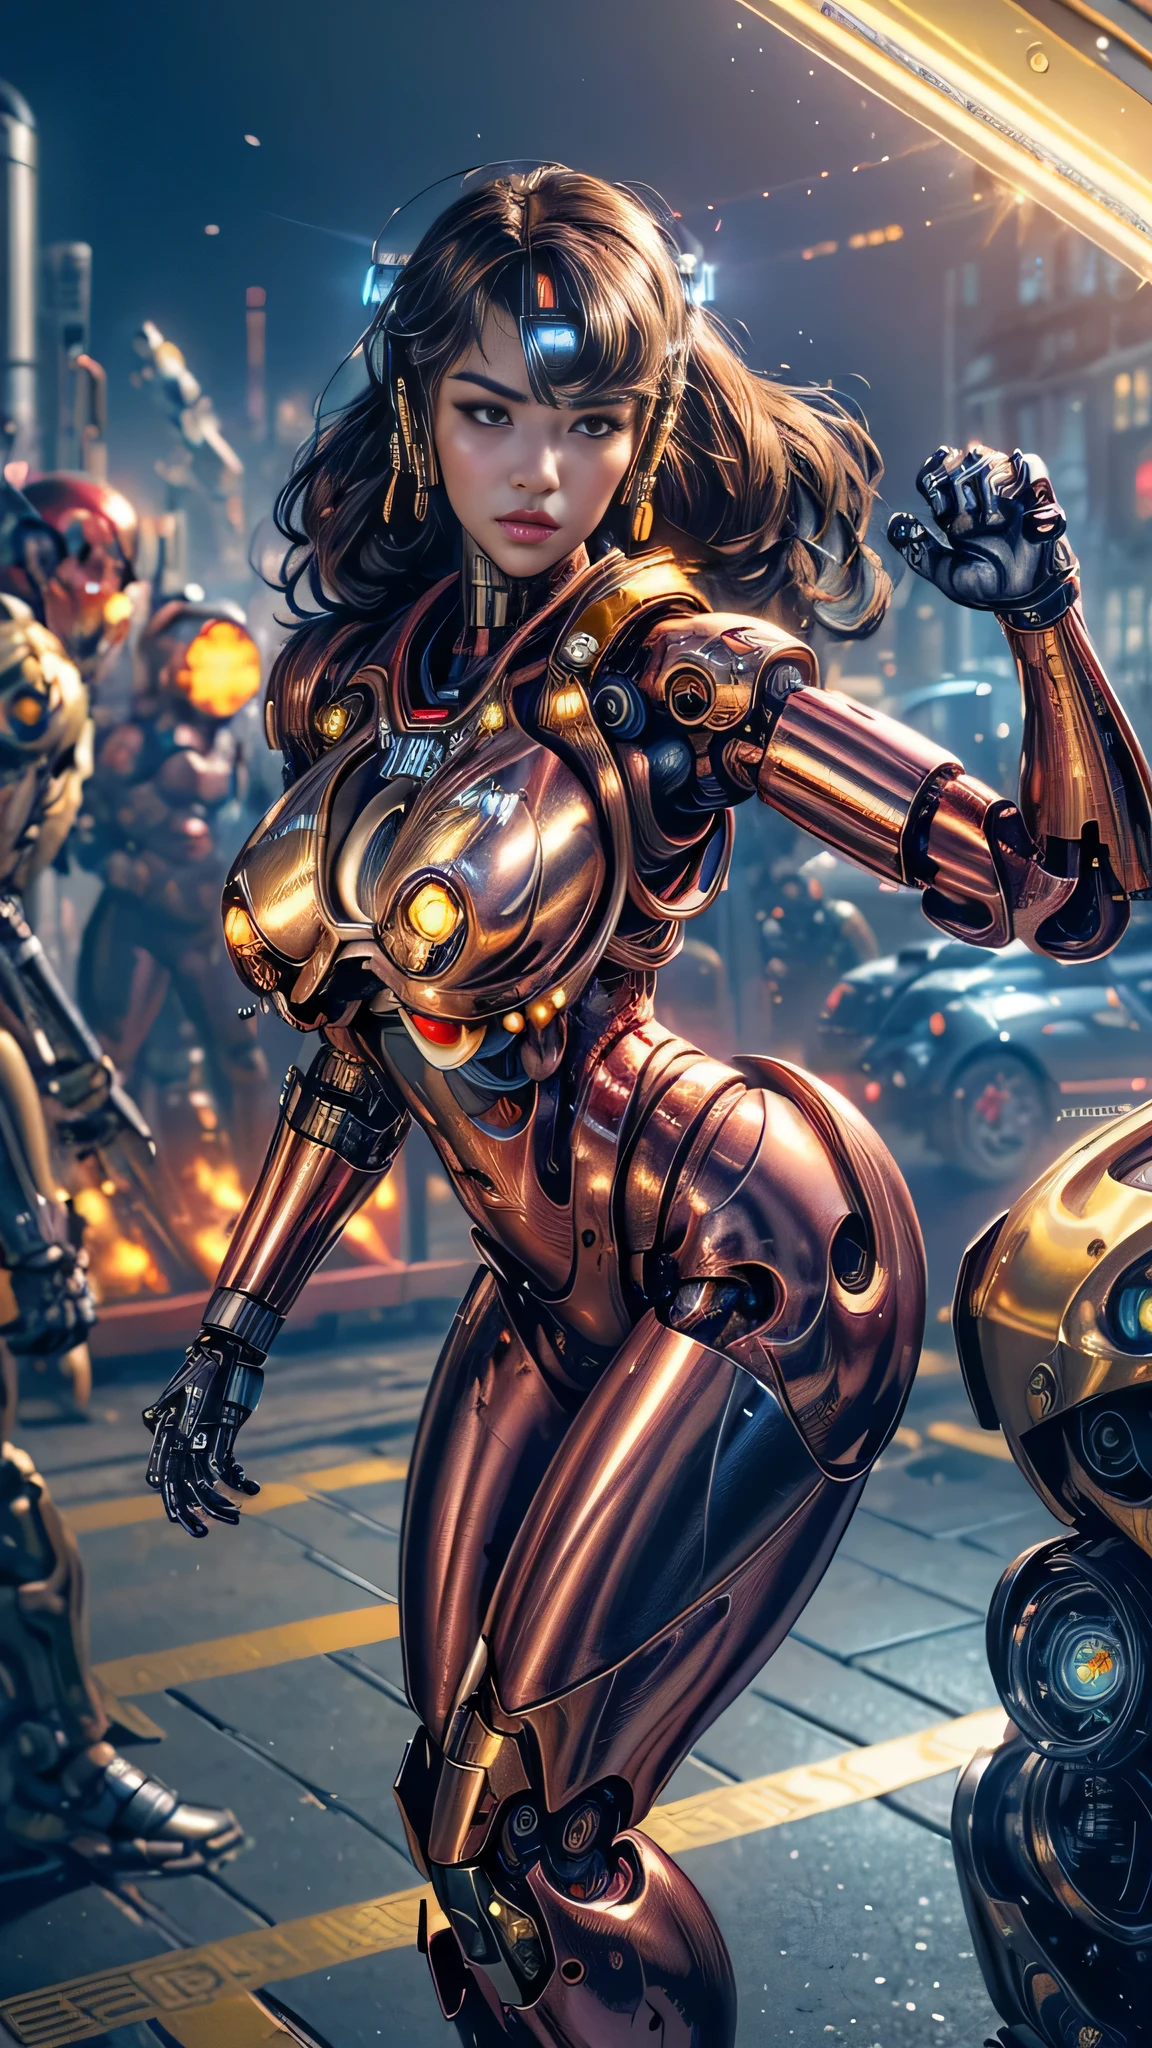 (Reality, Photorealistic: 1.37), (Maste Piece: 1.2), (Best Quality: 1.4), (Ultra High Resolution: 1.2), (Raw Photo: 1.2), (Breast Sharp Focus: 1.3), Vivid Details, Hyper Realistic, 1 Girl, Solo, Japanese Girl, (((Cyborg:1.4))), Cyborg Girl, Cyborg Armor, Cyborg Clothes, Beautiful Detailed Eyes, Fine Details, Bright Pupils, Brown Eyes, Full Body, ( big breasts), long curly hair, red hair, POV, female focus, puffy eyes, (dynamic pose: 1.4), (dynamic angle: 1.6), beautiful face, detailed face, perfect proportions , big breasts, thin waist, navel, big butt, crotch gap, thighs, open thighs, showing panties, exposed, fighting stance, fighting pose , running forward, running, (((((Golden shiny Metallic colors | Red metallic colors | Blue metallic colors))), (((metallic luster, metallic reflections, mechanical details, highly mechanical details, complex mechanical structures, reflections, refraction,))), ((( Mirrored power armor, Fallout 4, Fallout,))), battlefield, mechanized background, giant robot in the background, outdoors, cinematic lighting, cyberpunk world. Cyberpunk metropolis, neon, sci-fi style, sfw:1.98,